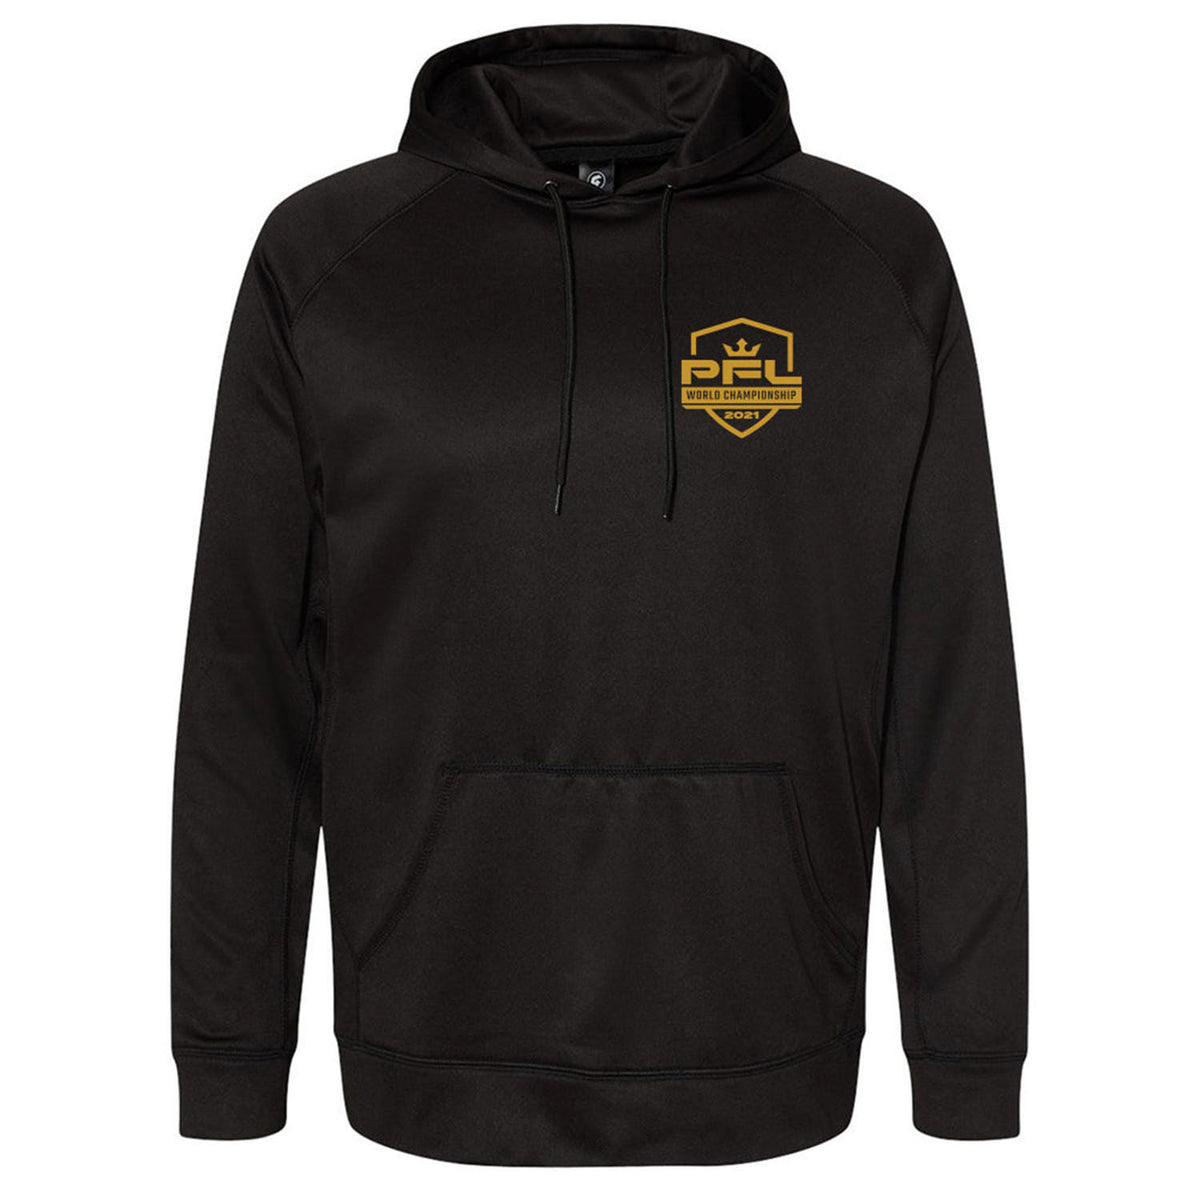 PFL Championship Performance Hoodie in Black - Front View